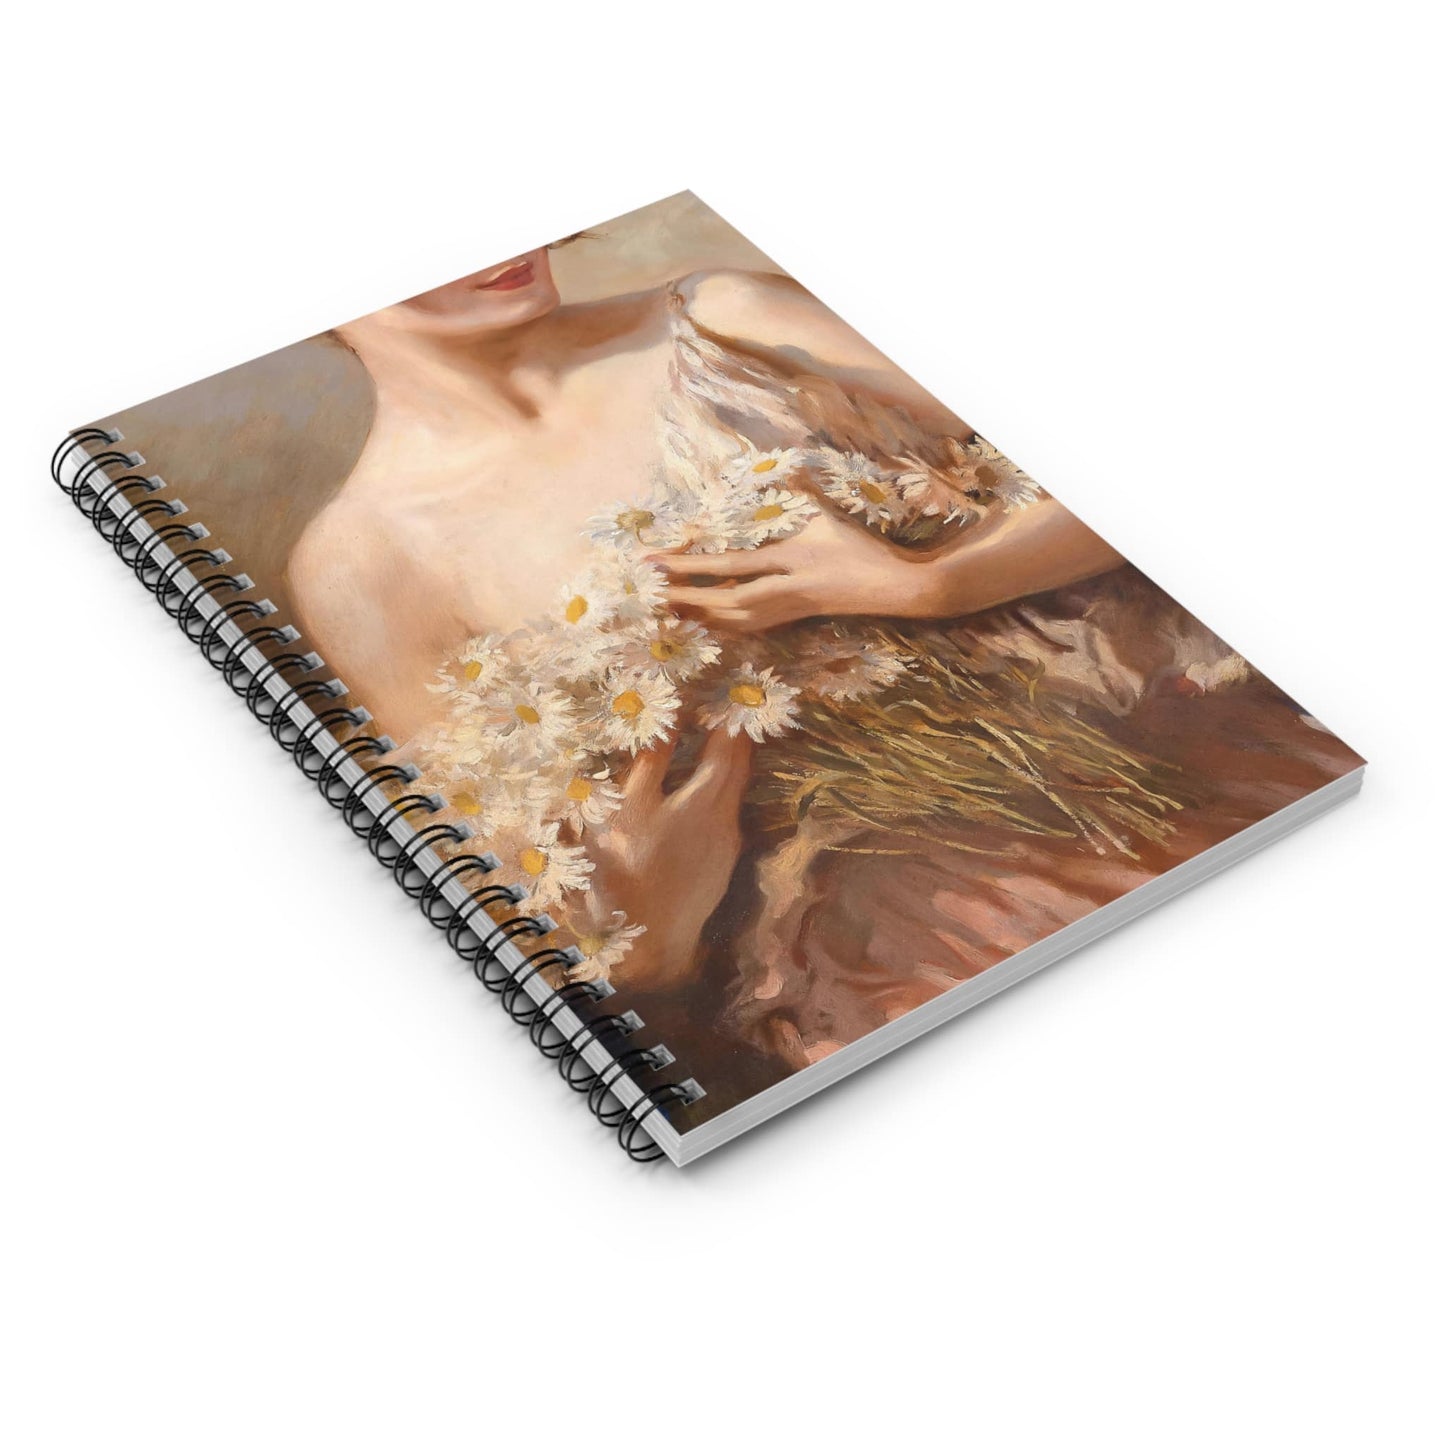 Flower Aesthetic Spiral Notebook Laying Flat on White Surface